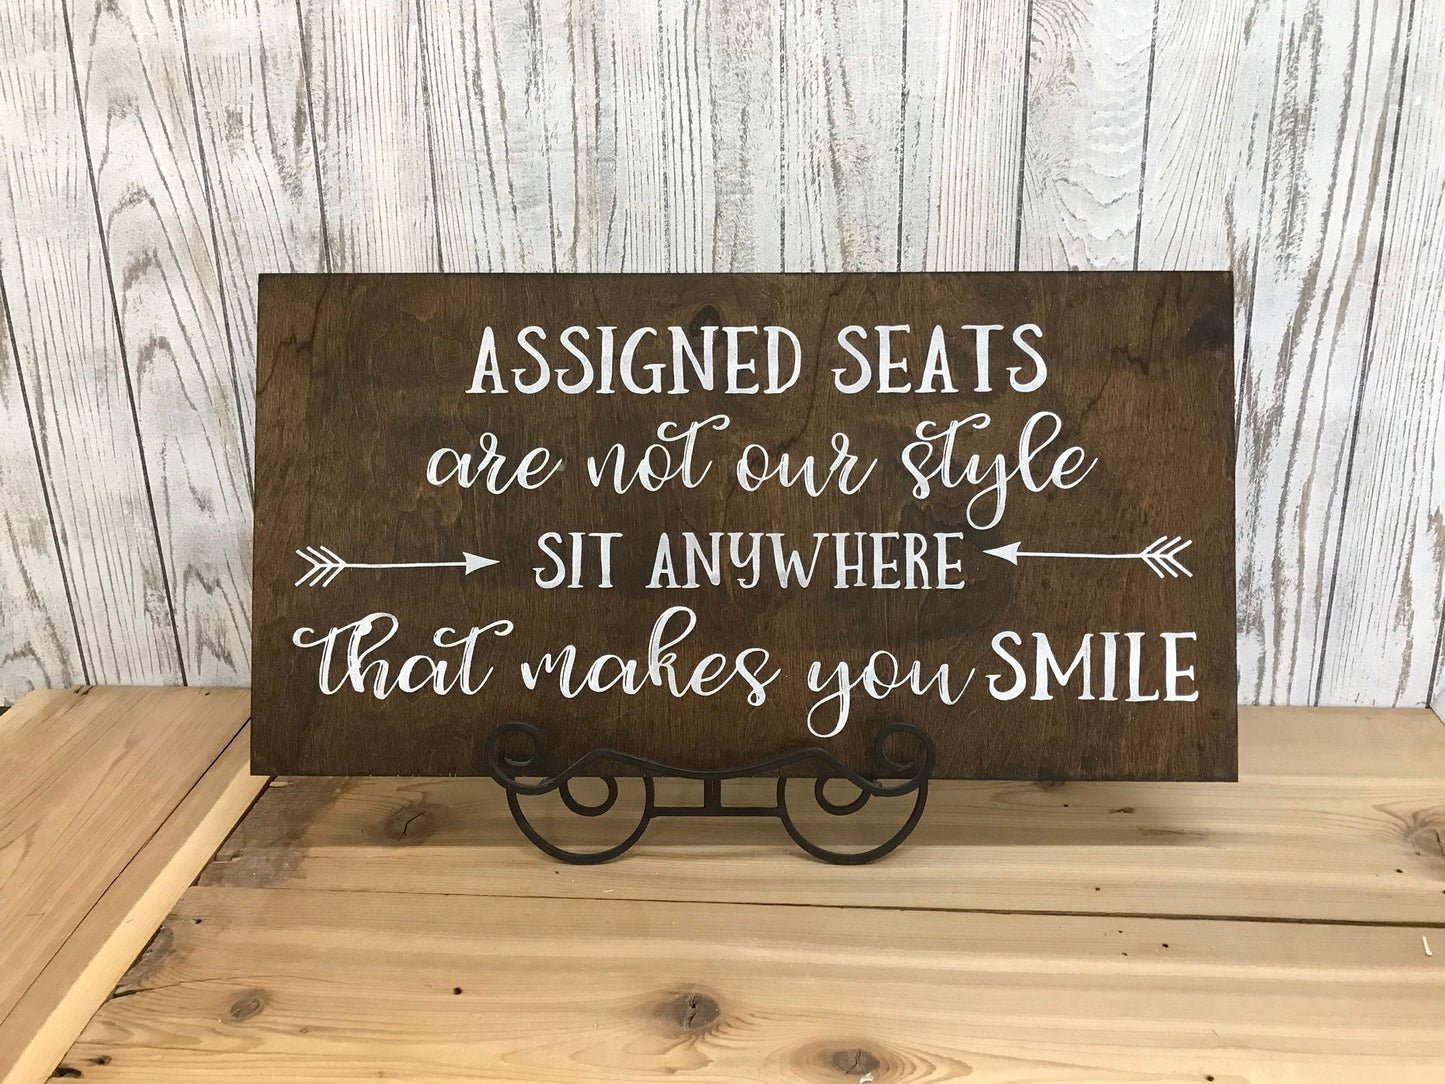 Assigned seats are not our style sit anywhere that makes you smile wedding sign